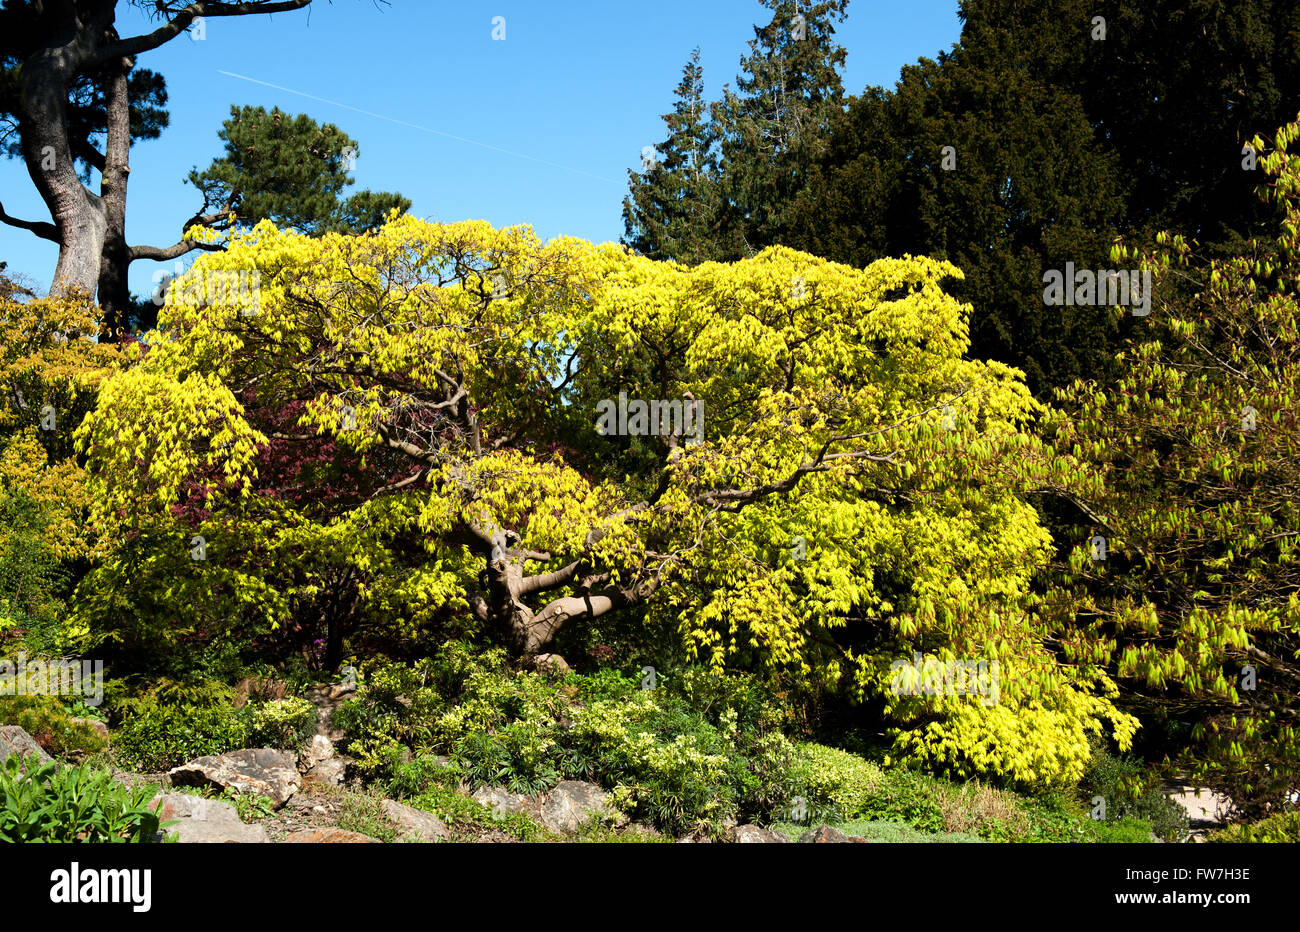 Beautiful landscape on a sunny day in the garden Stock Photo